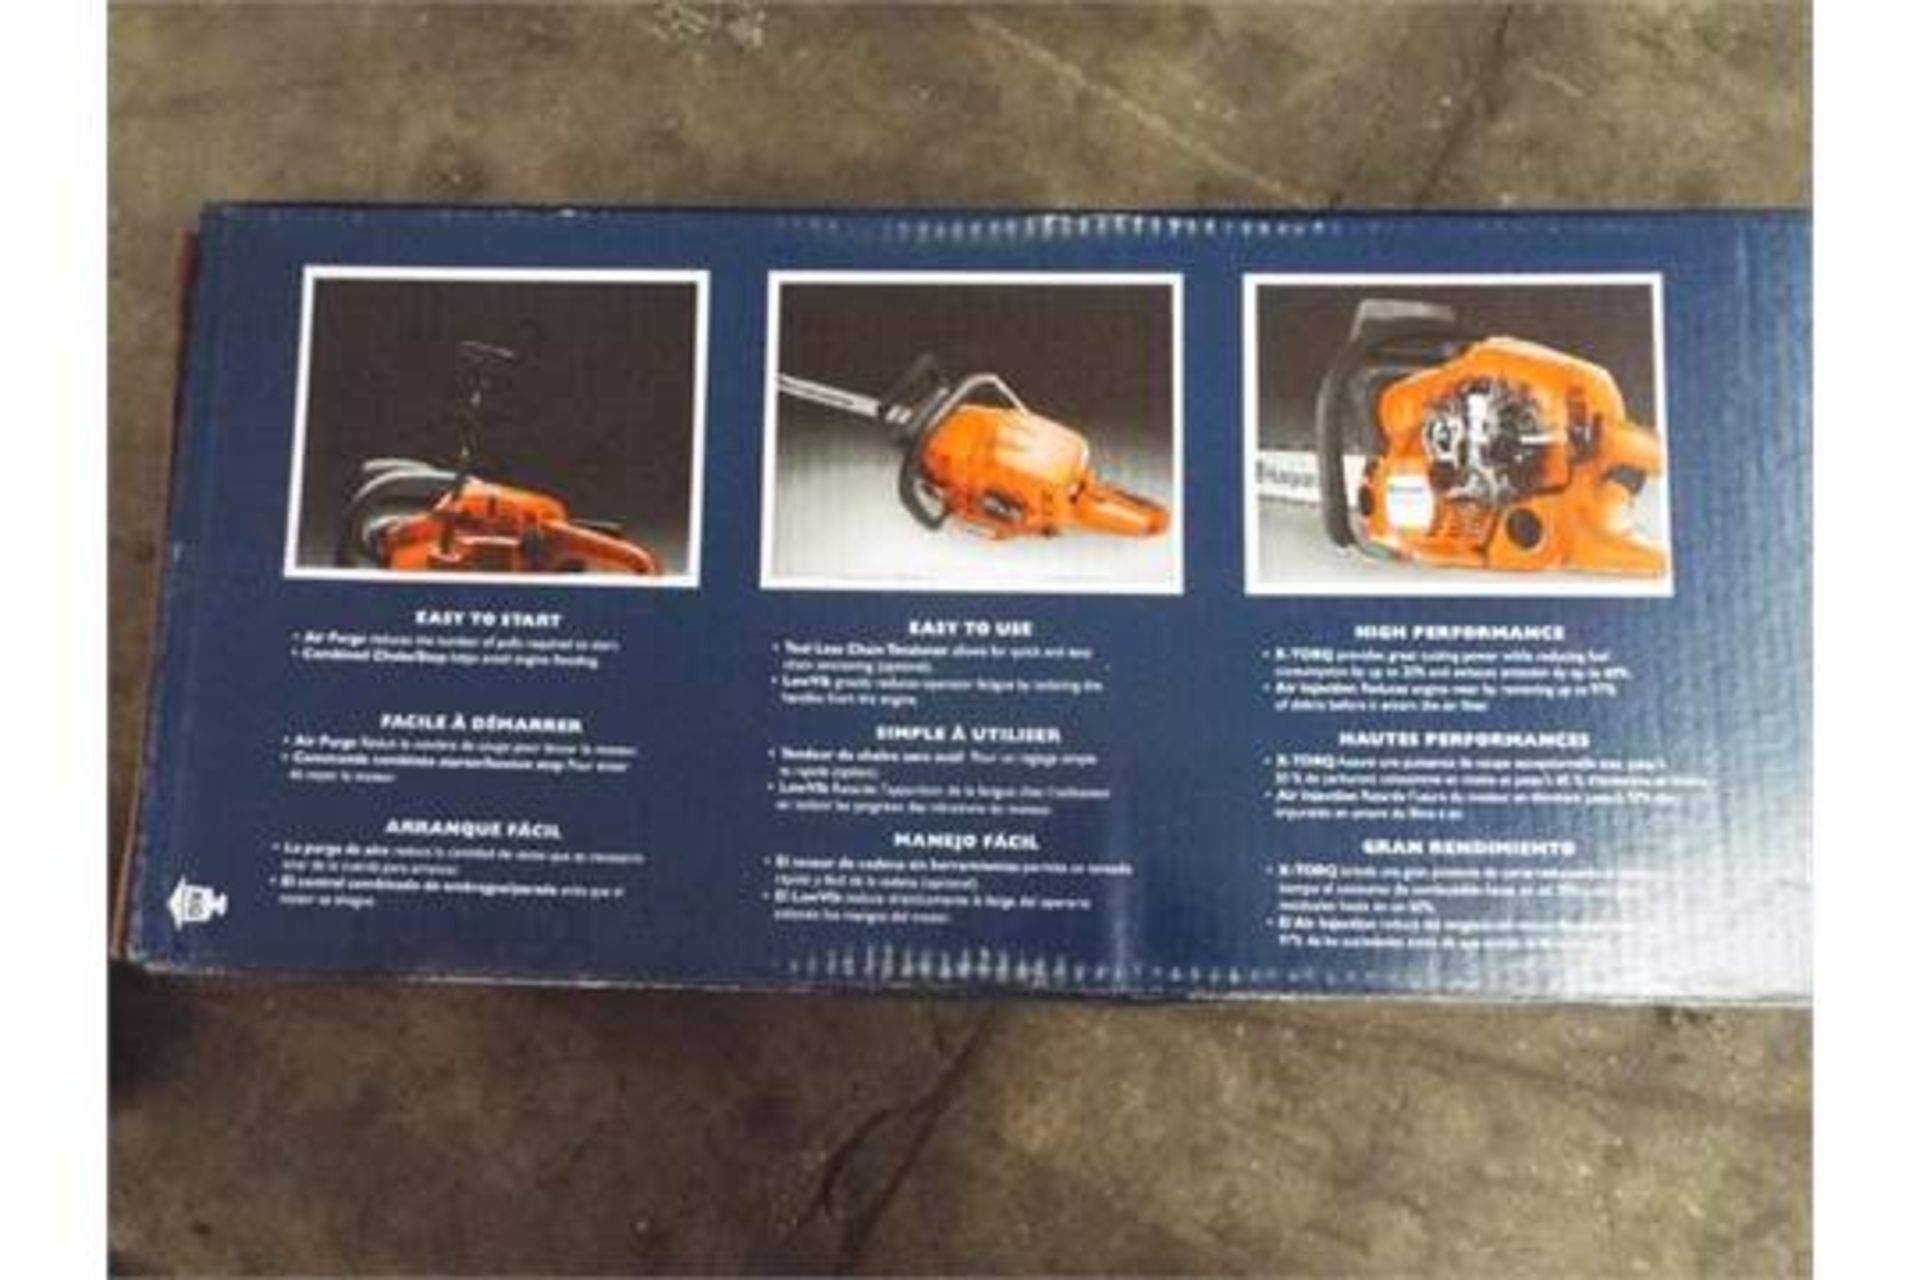 New Unused Husqvarna 240 E-Series Chainsaw with 16" Blade - Image 3 of 6